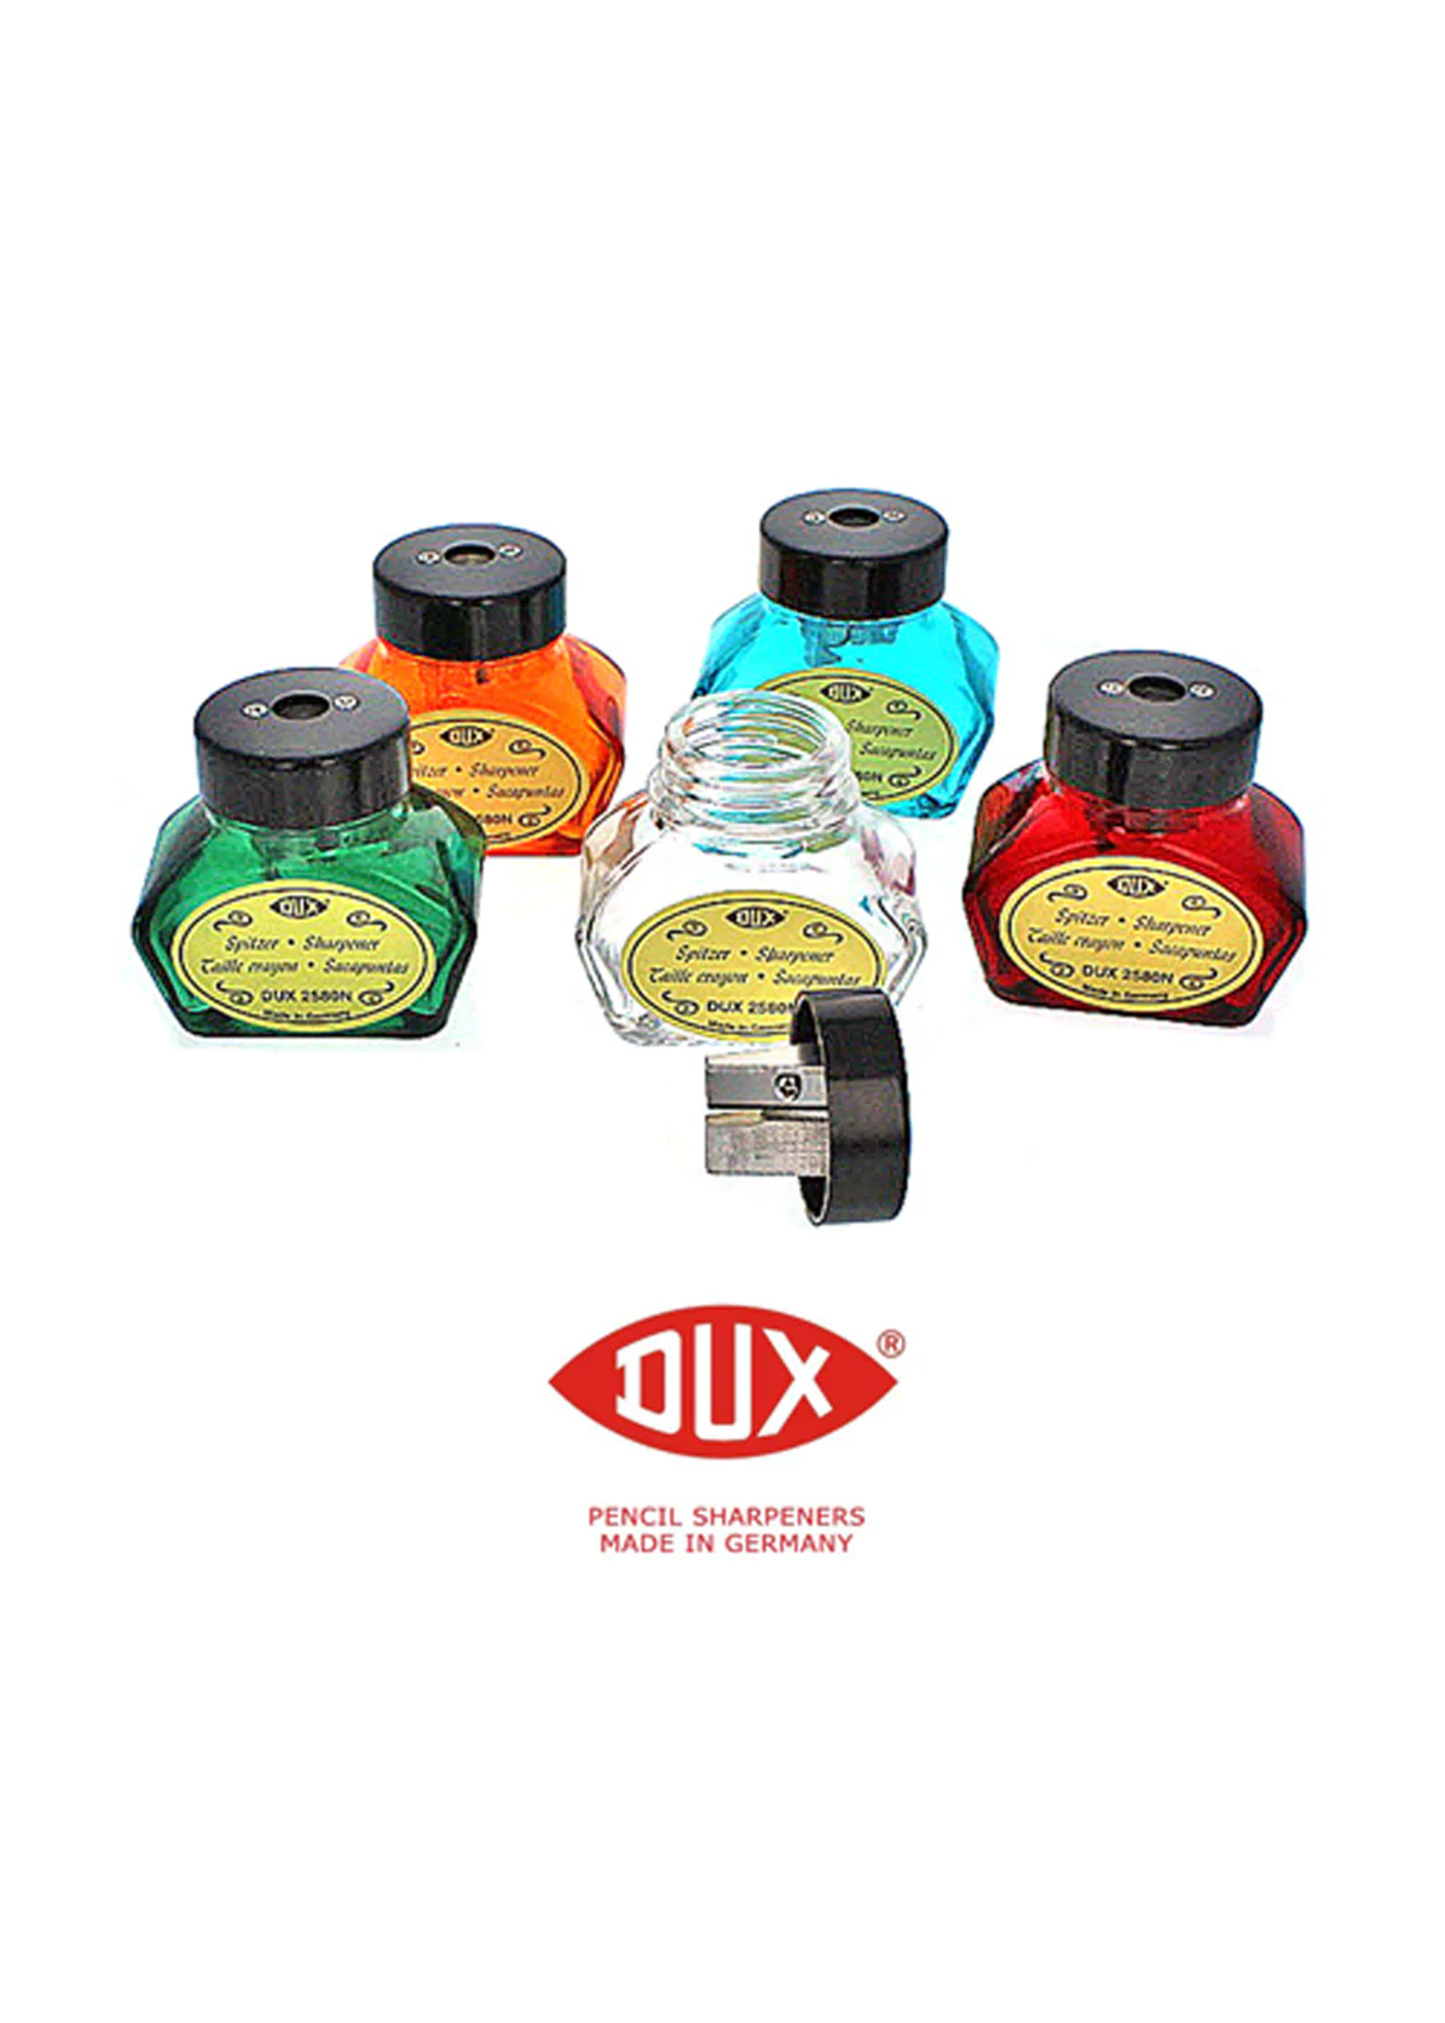 DUX Glass Inkwell Pencil Sharpener - Clear